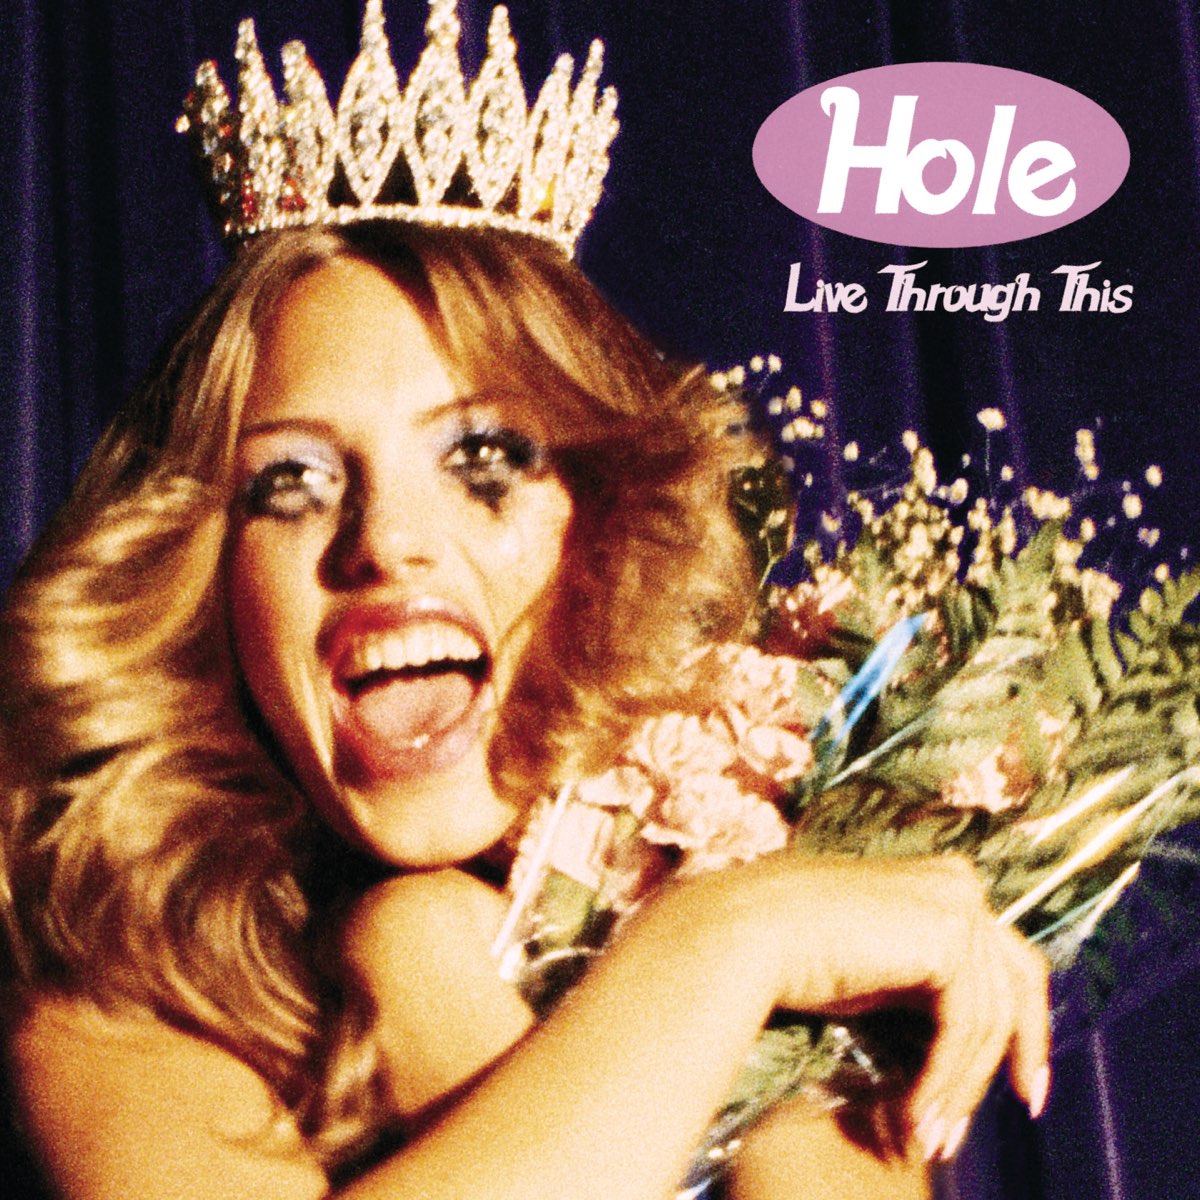 "Live Through This" by Hole album cover